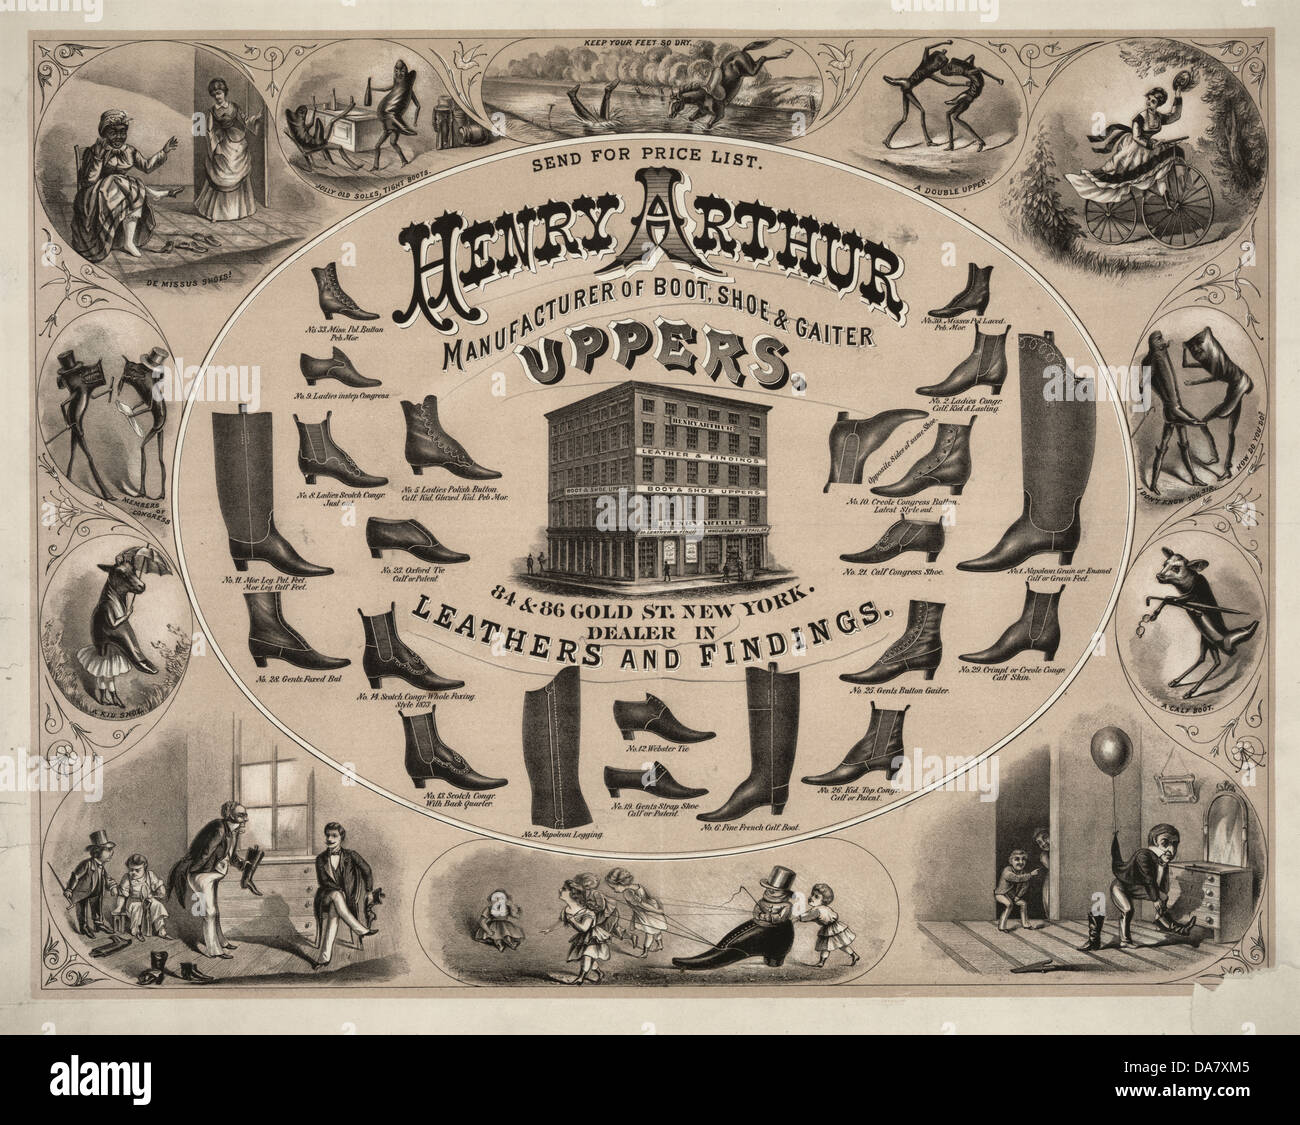 Henry Arthur manufacturer of boot, shoe, and gaiter uppers, advertisment, New York City, circa 1873 Stock Photo